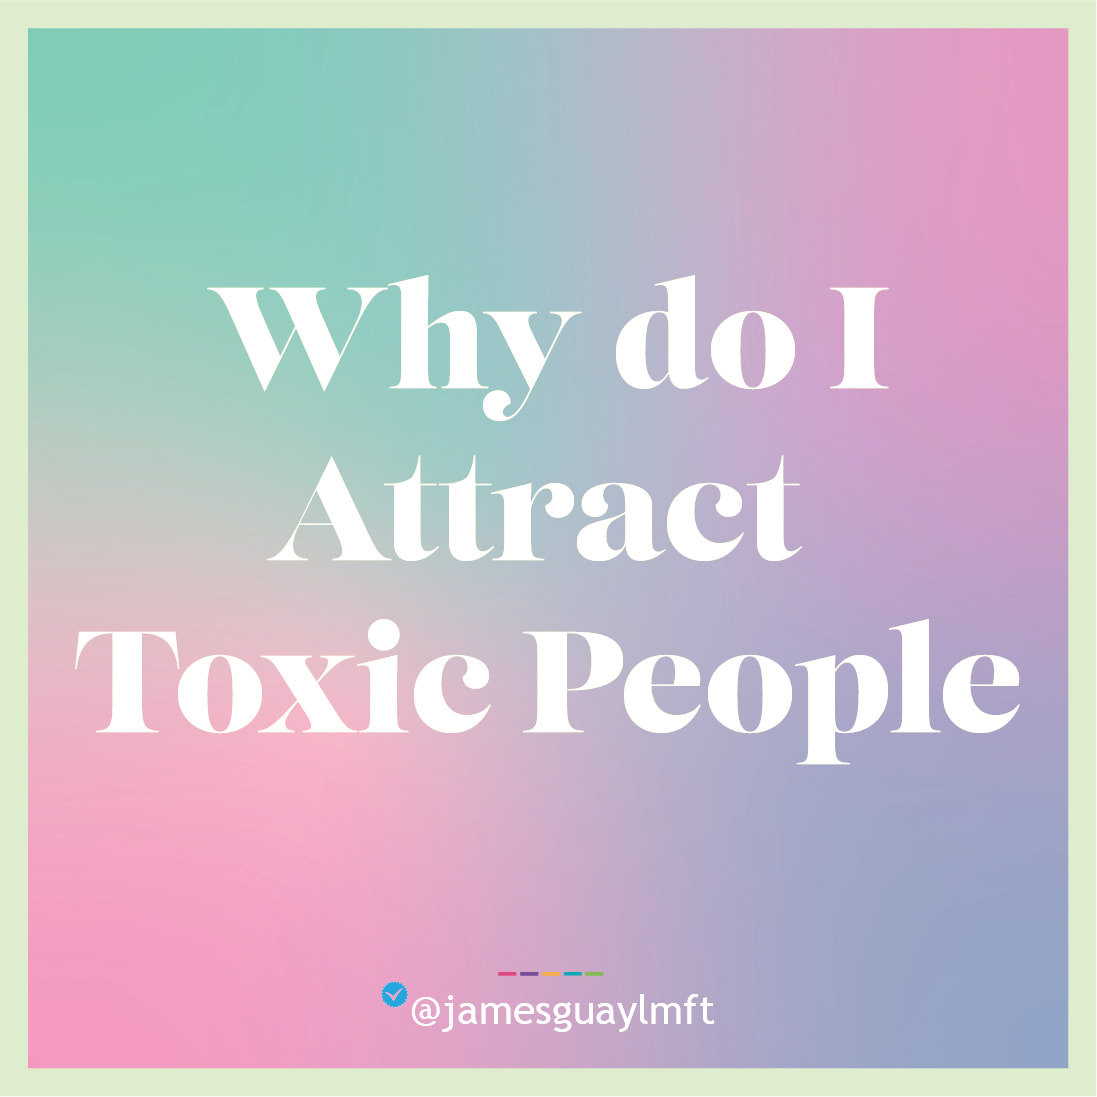 Why do I attract toxic people?